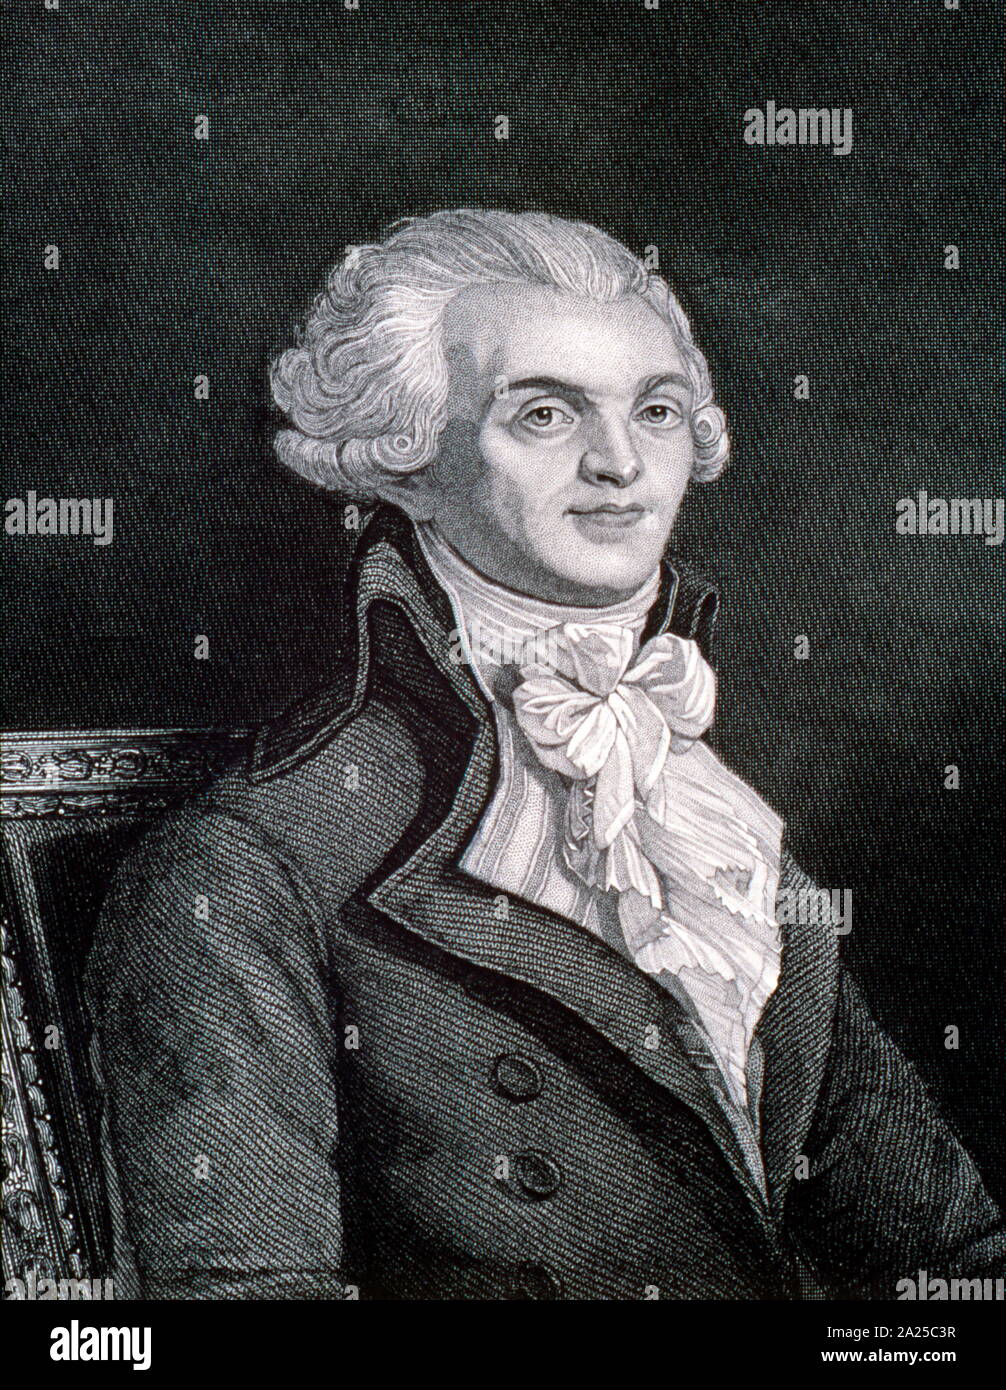 Maximilien Robespierre 1758 1794 French Lawyer And Politician As Well As One Of The Best Known And Most Influential Figures Associated With The French Revolution Stock Photo Alamy December 31, 2020 at 10:04 am ·. https www alamy com maximilien robespierre 1758 1794 french lawyer and politician as well as one of the best known and most influential figures associated with the french revolution image328345579 html